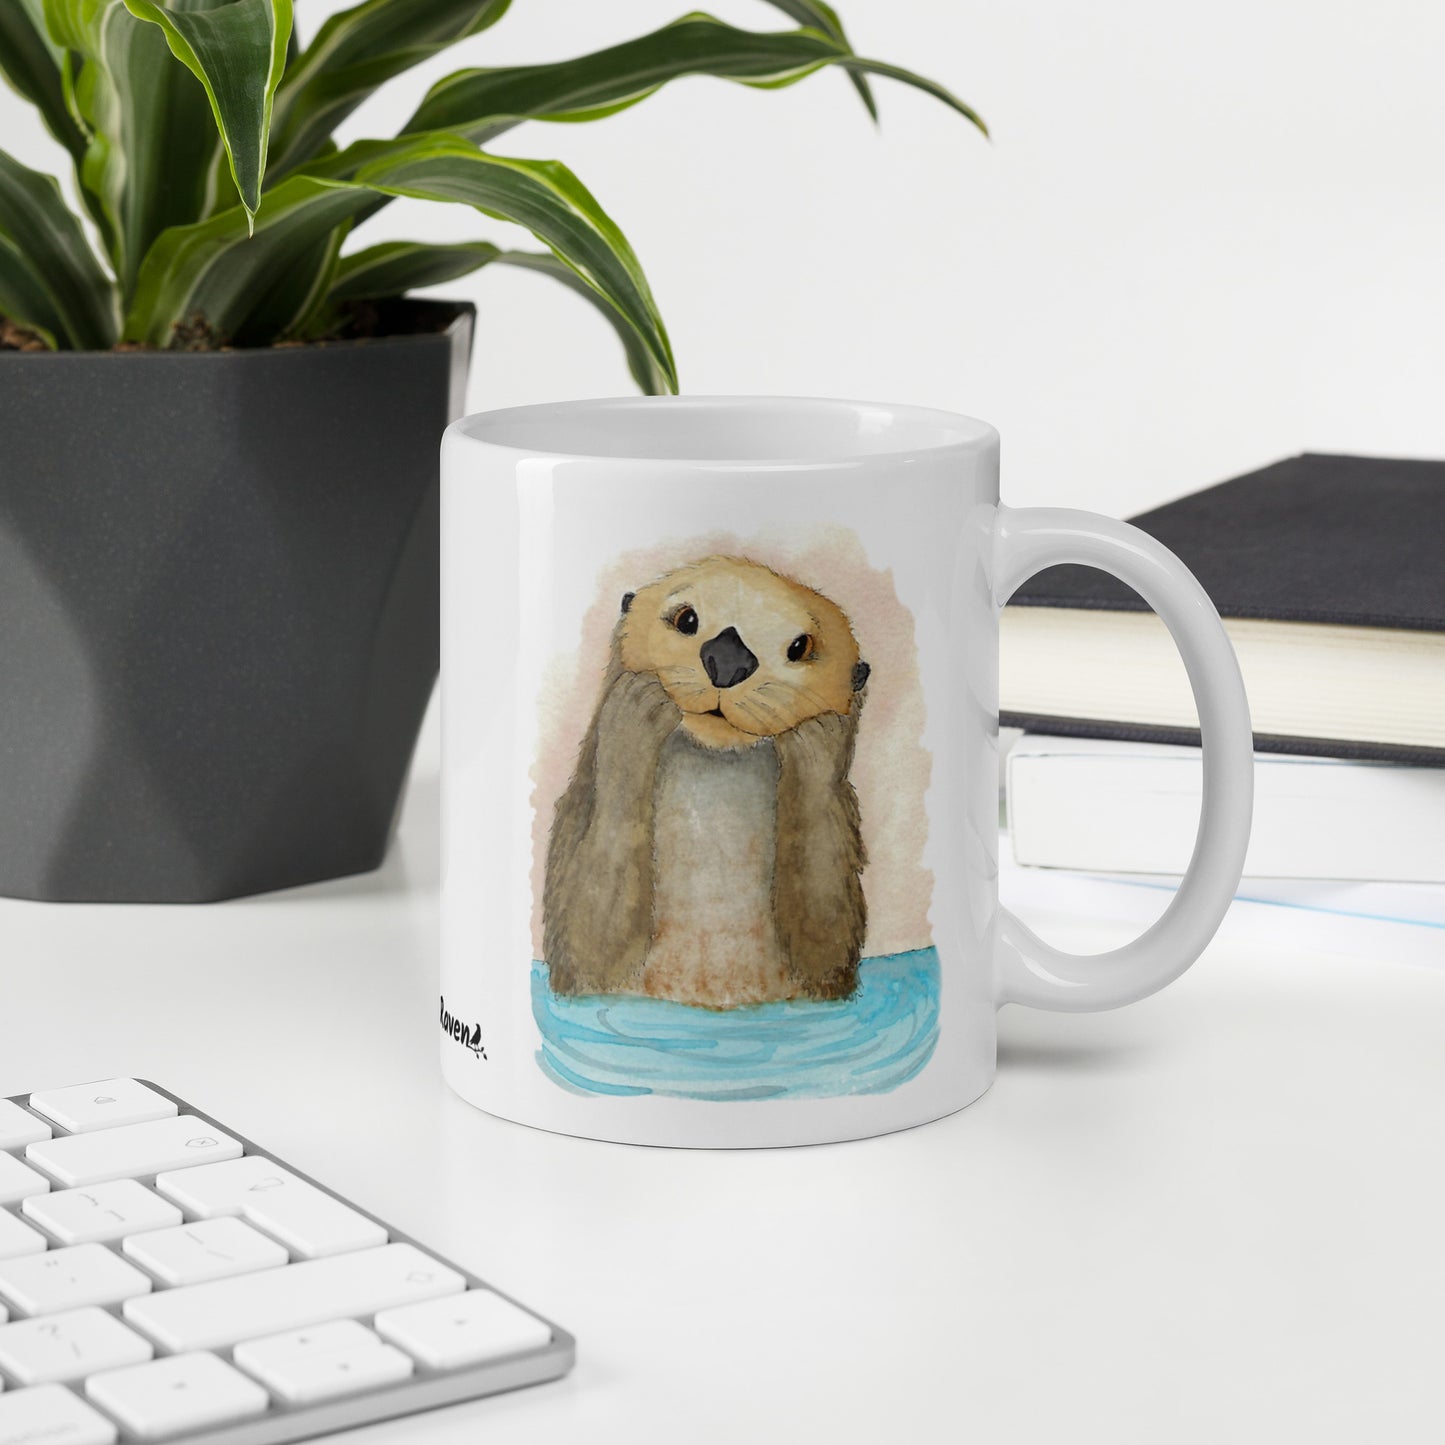 11 ounce white ceramic mug featuring watercolor print of a sea otter on both sides. Dishwasher and microwave safe. Shown on desk by keyboard, book, and potted plant.